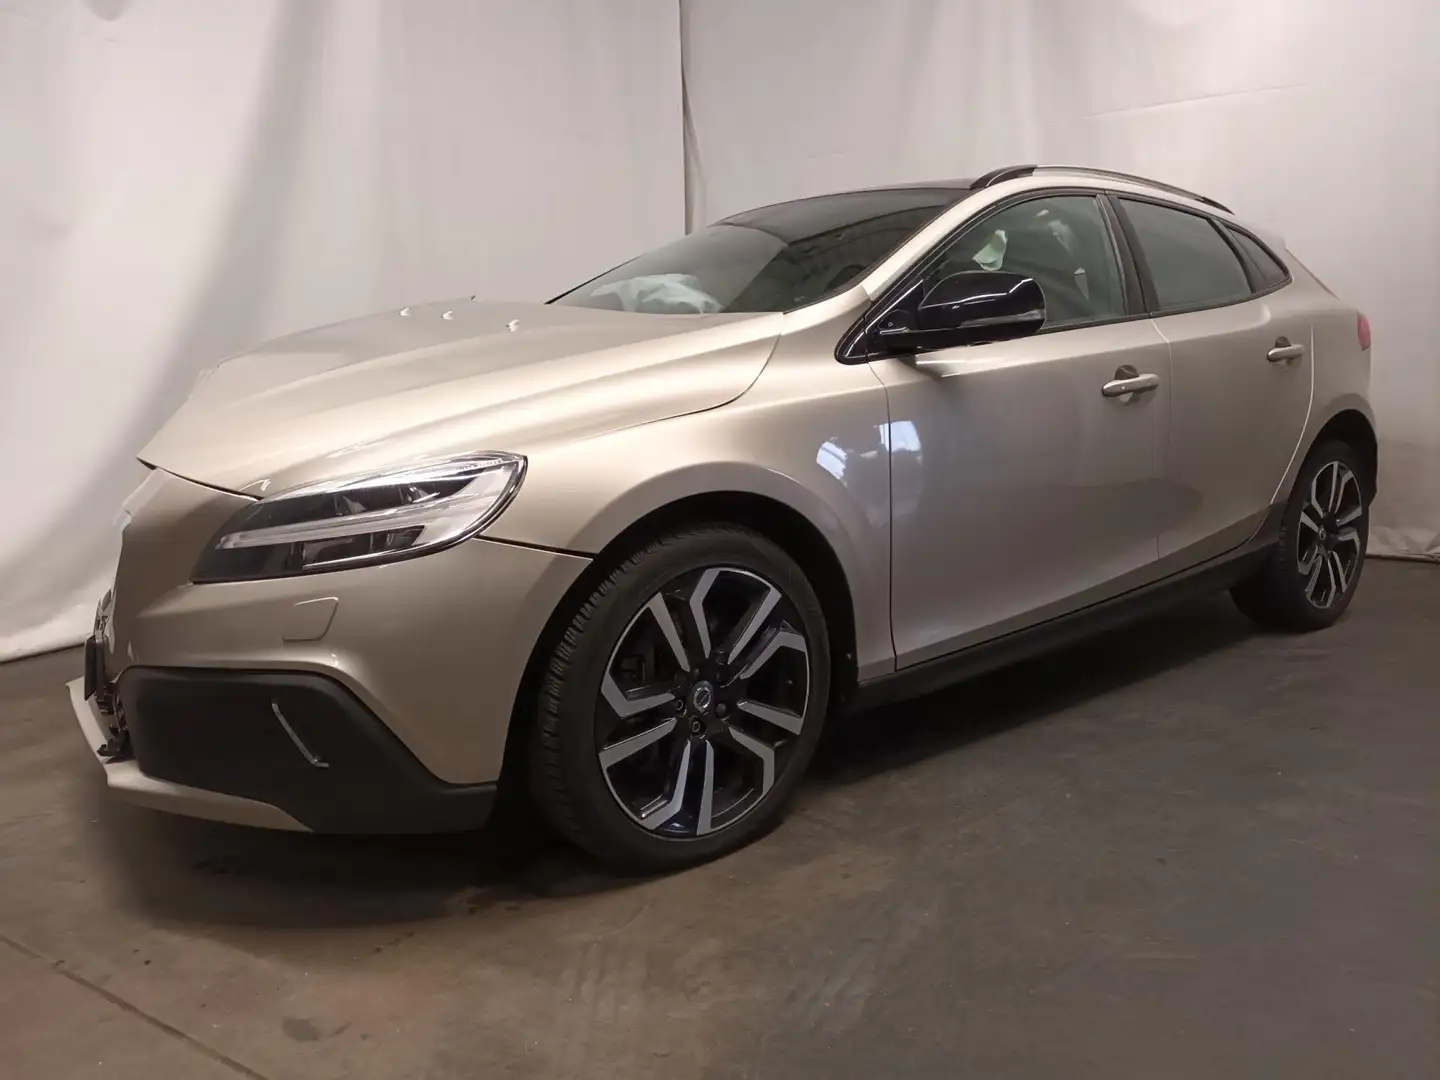 Volvo V40 Cross Country 1.5 T3 Nordic+ - Front Schade - Airbags Defect Brun - 2